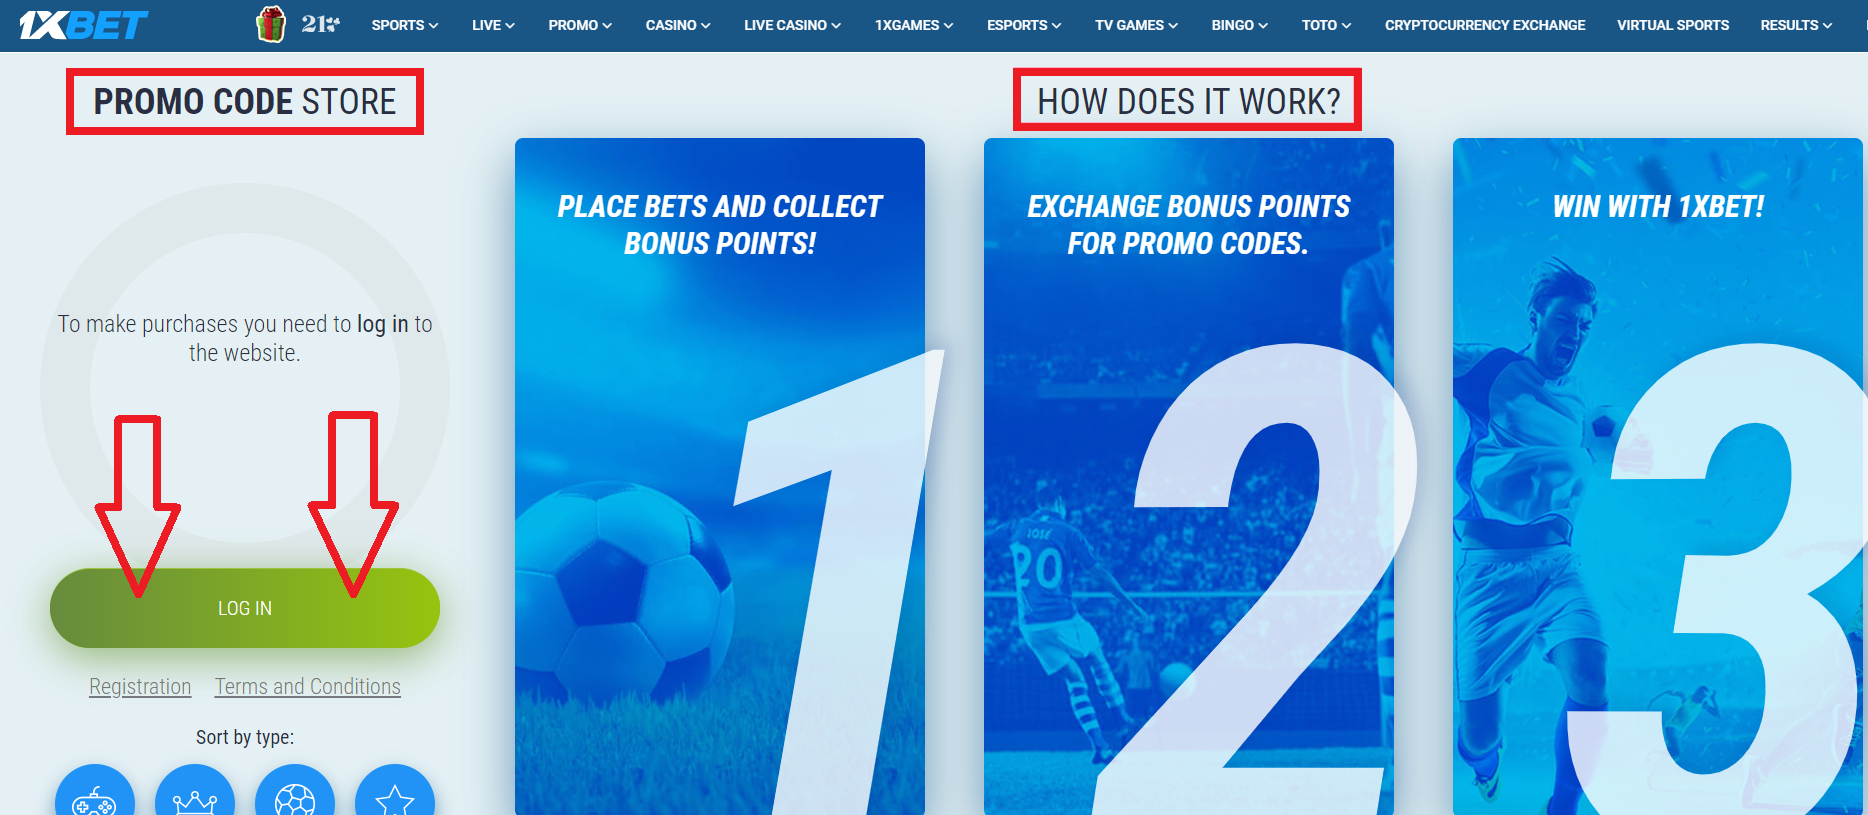 How to get a profitable 1xBet promo code